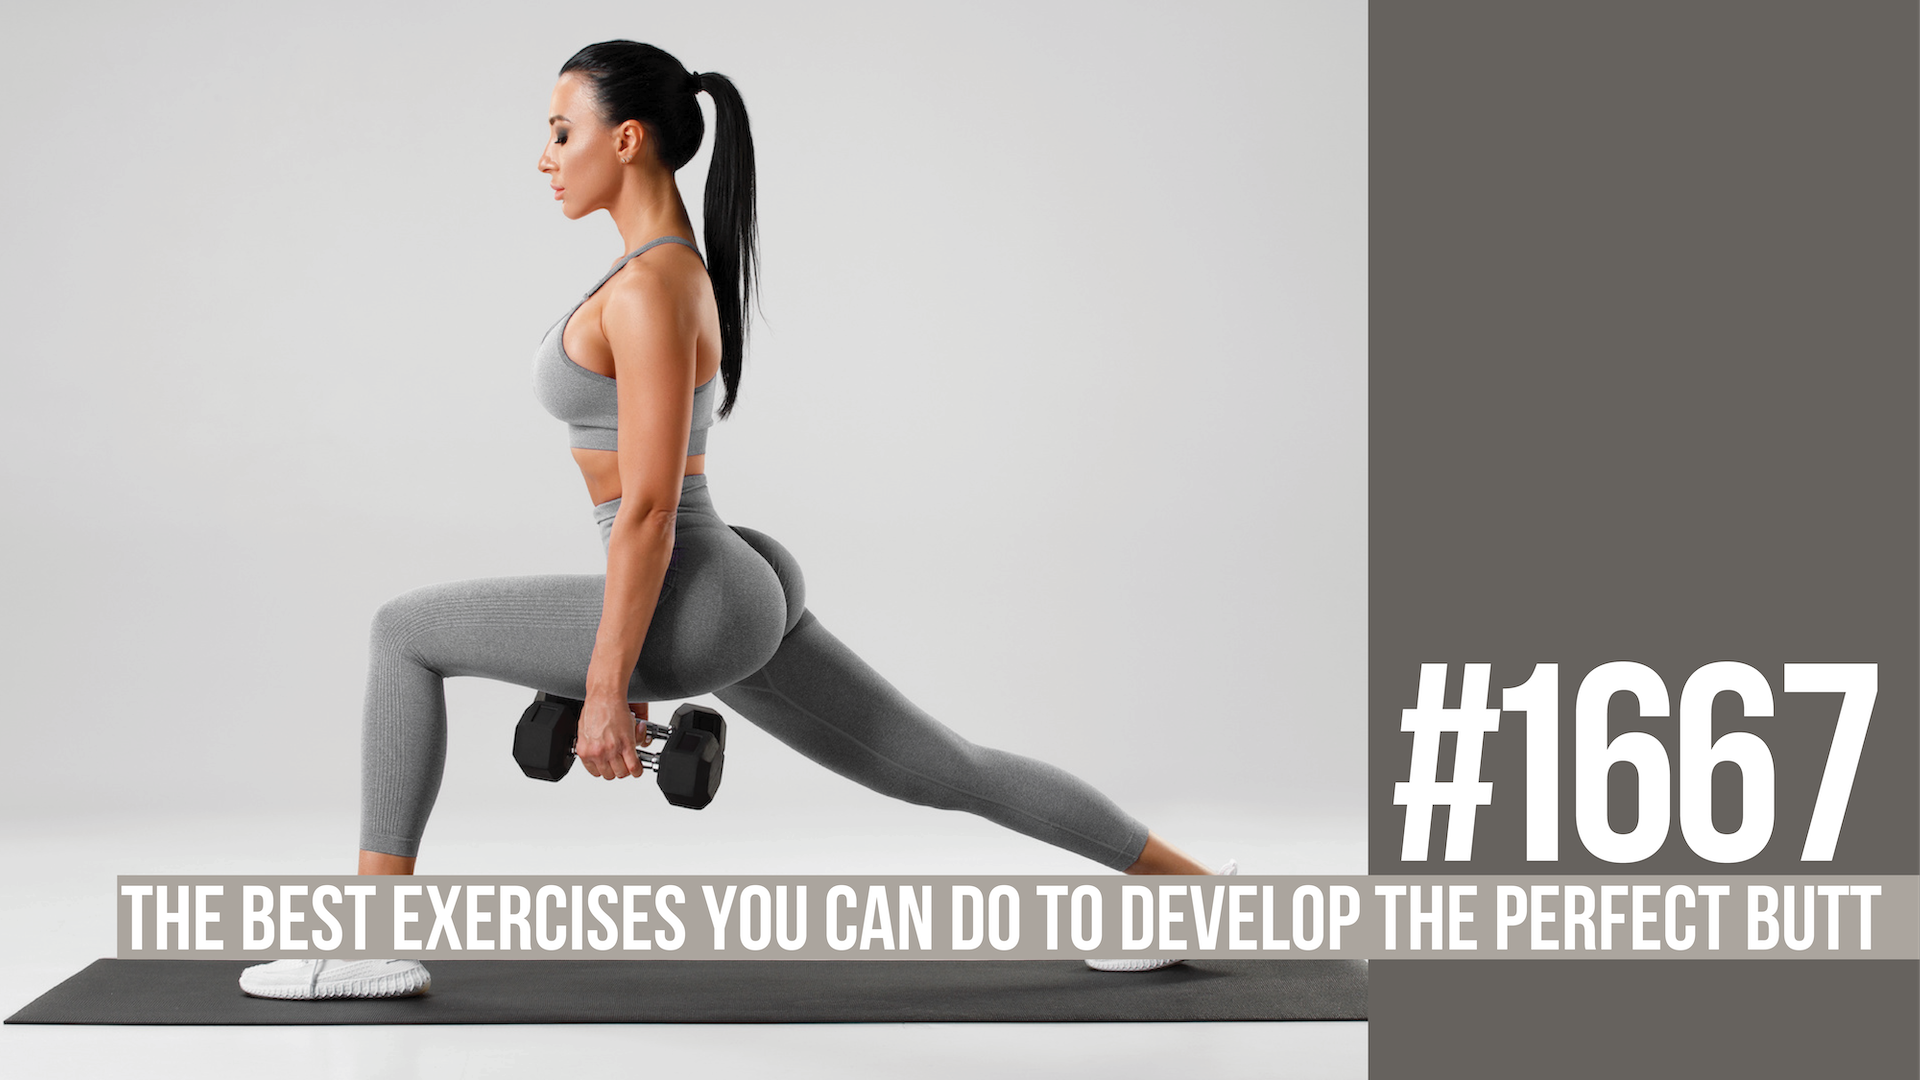 1667: The Best Exercises You Can Do to Develop the Perfect Butt